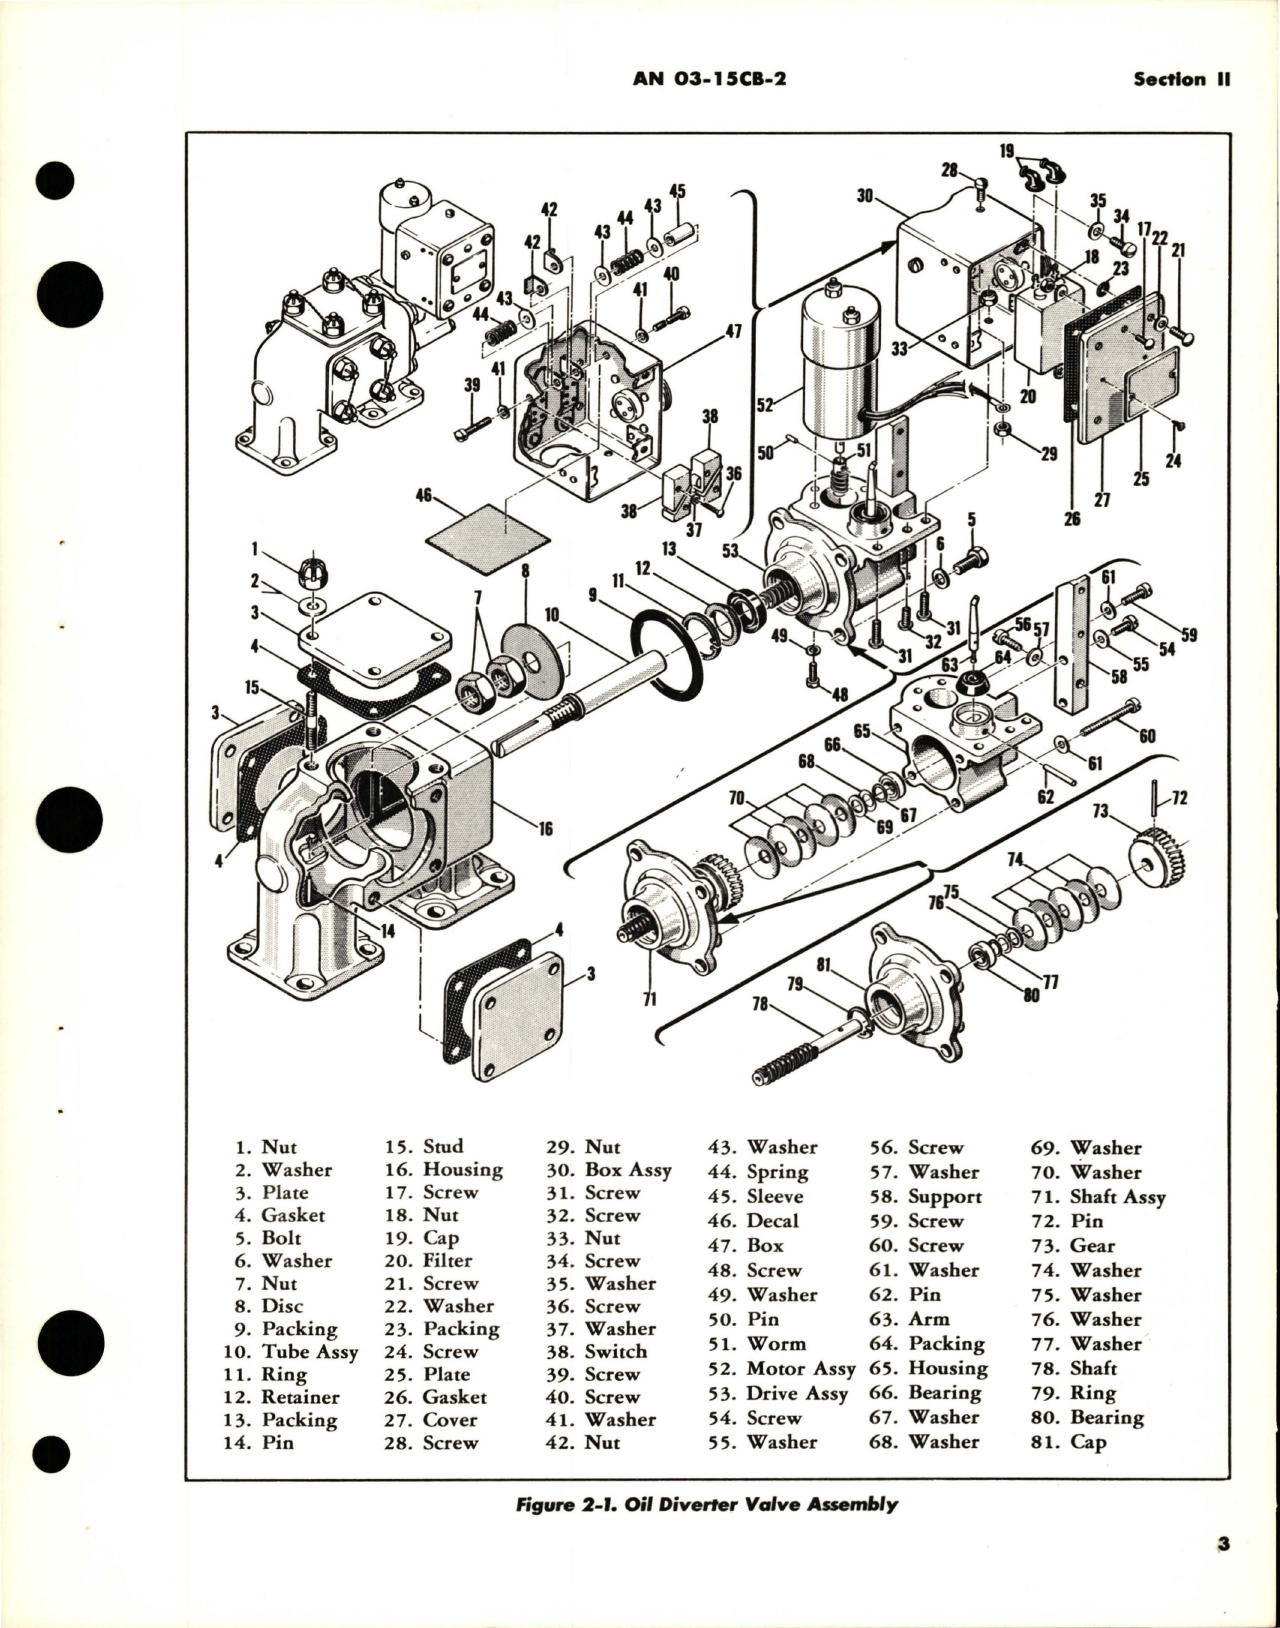 Sample page 9 from AirCorps Library document: Overhaul Instructions for Oil Diverter Valves